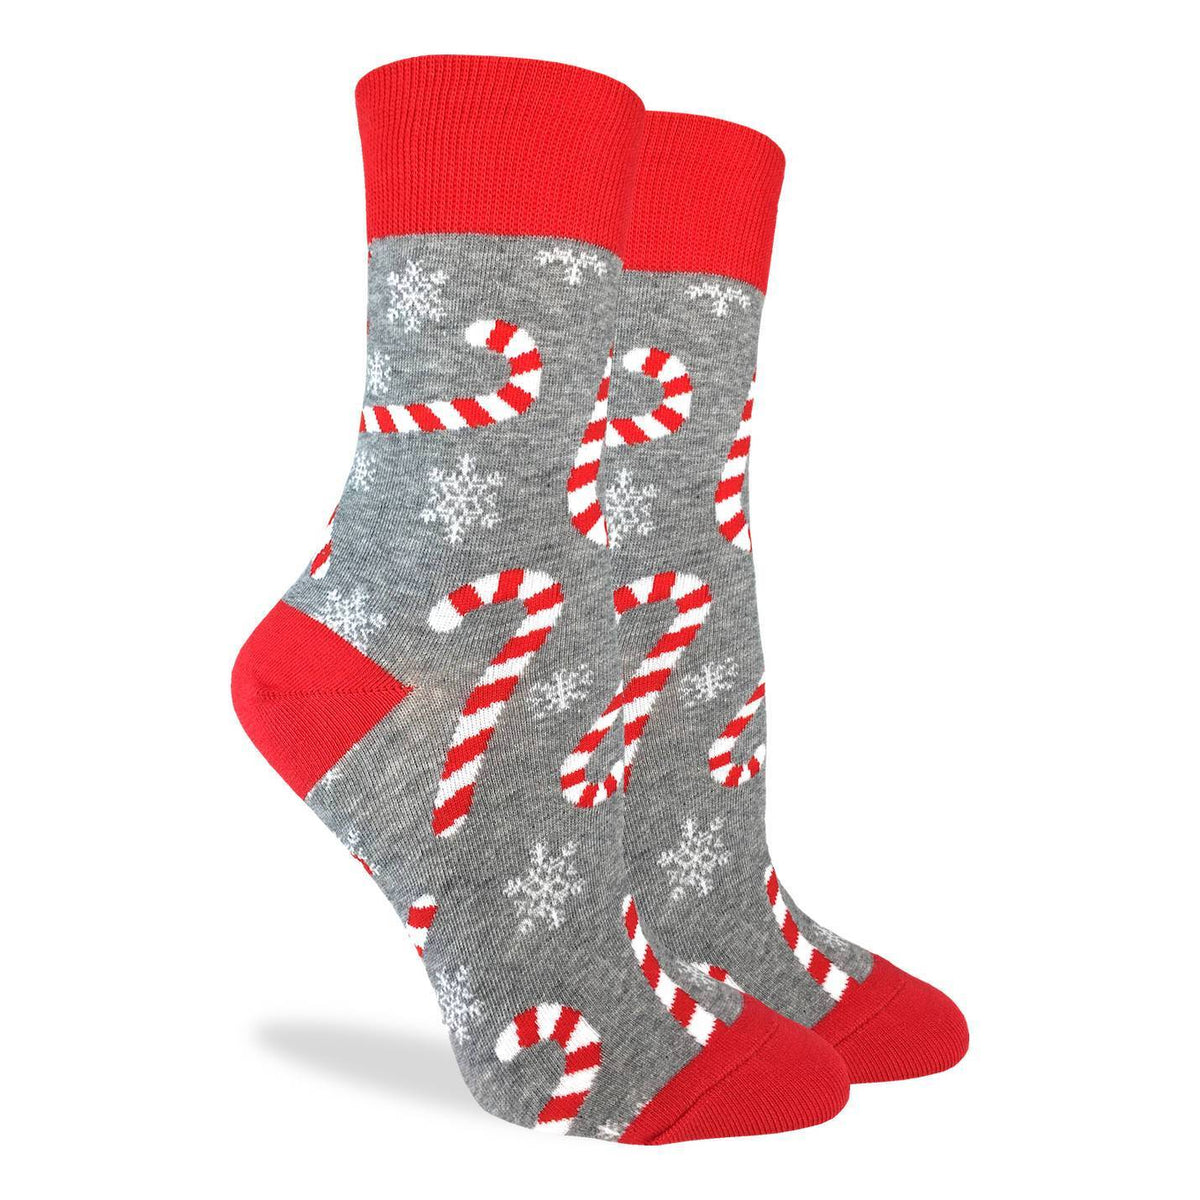 Women's Candy Canes Socks